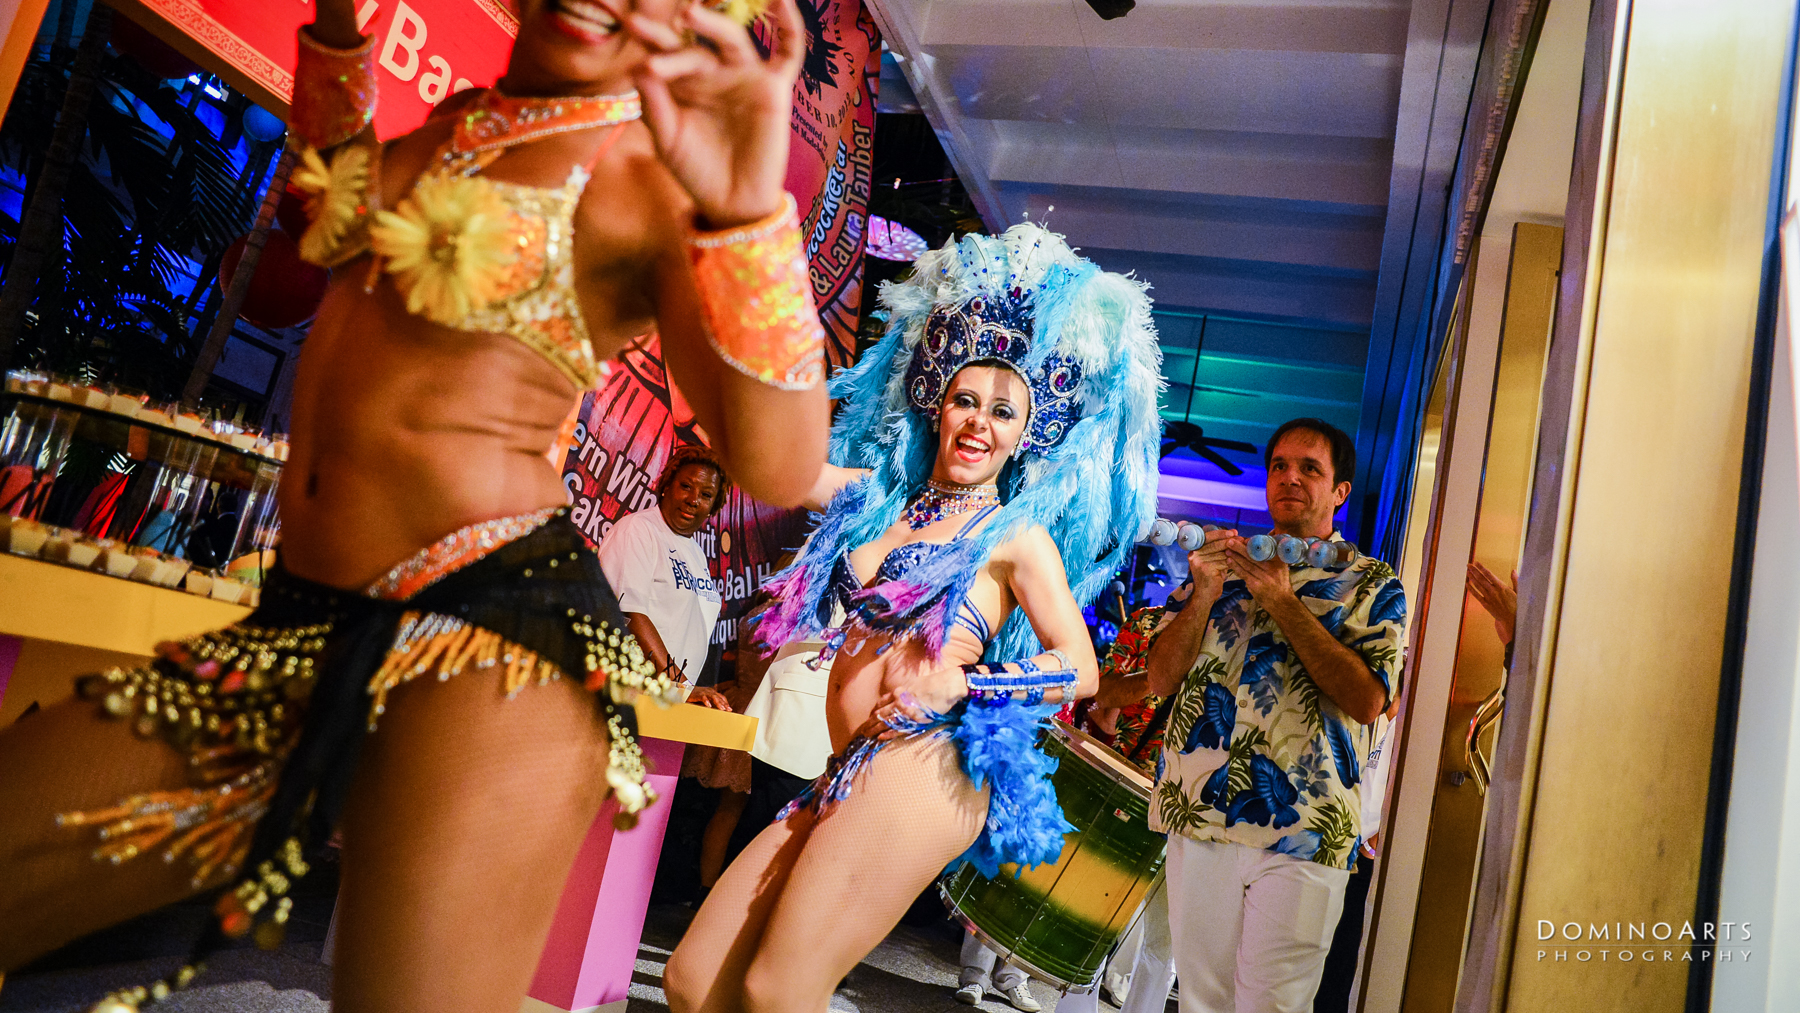 Entertainers at Destination Fashion Corporate Event at Bal Harbour by Domino Arts Photography